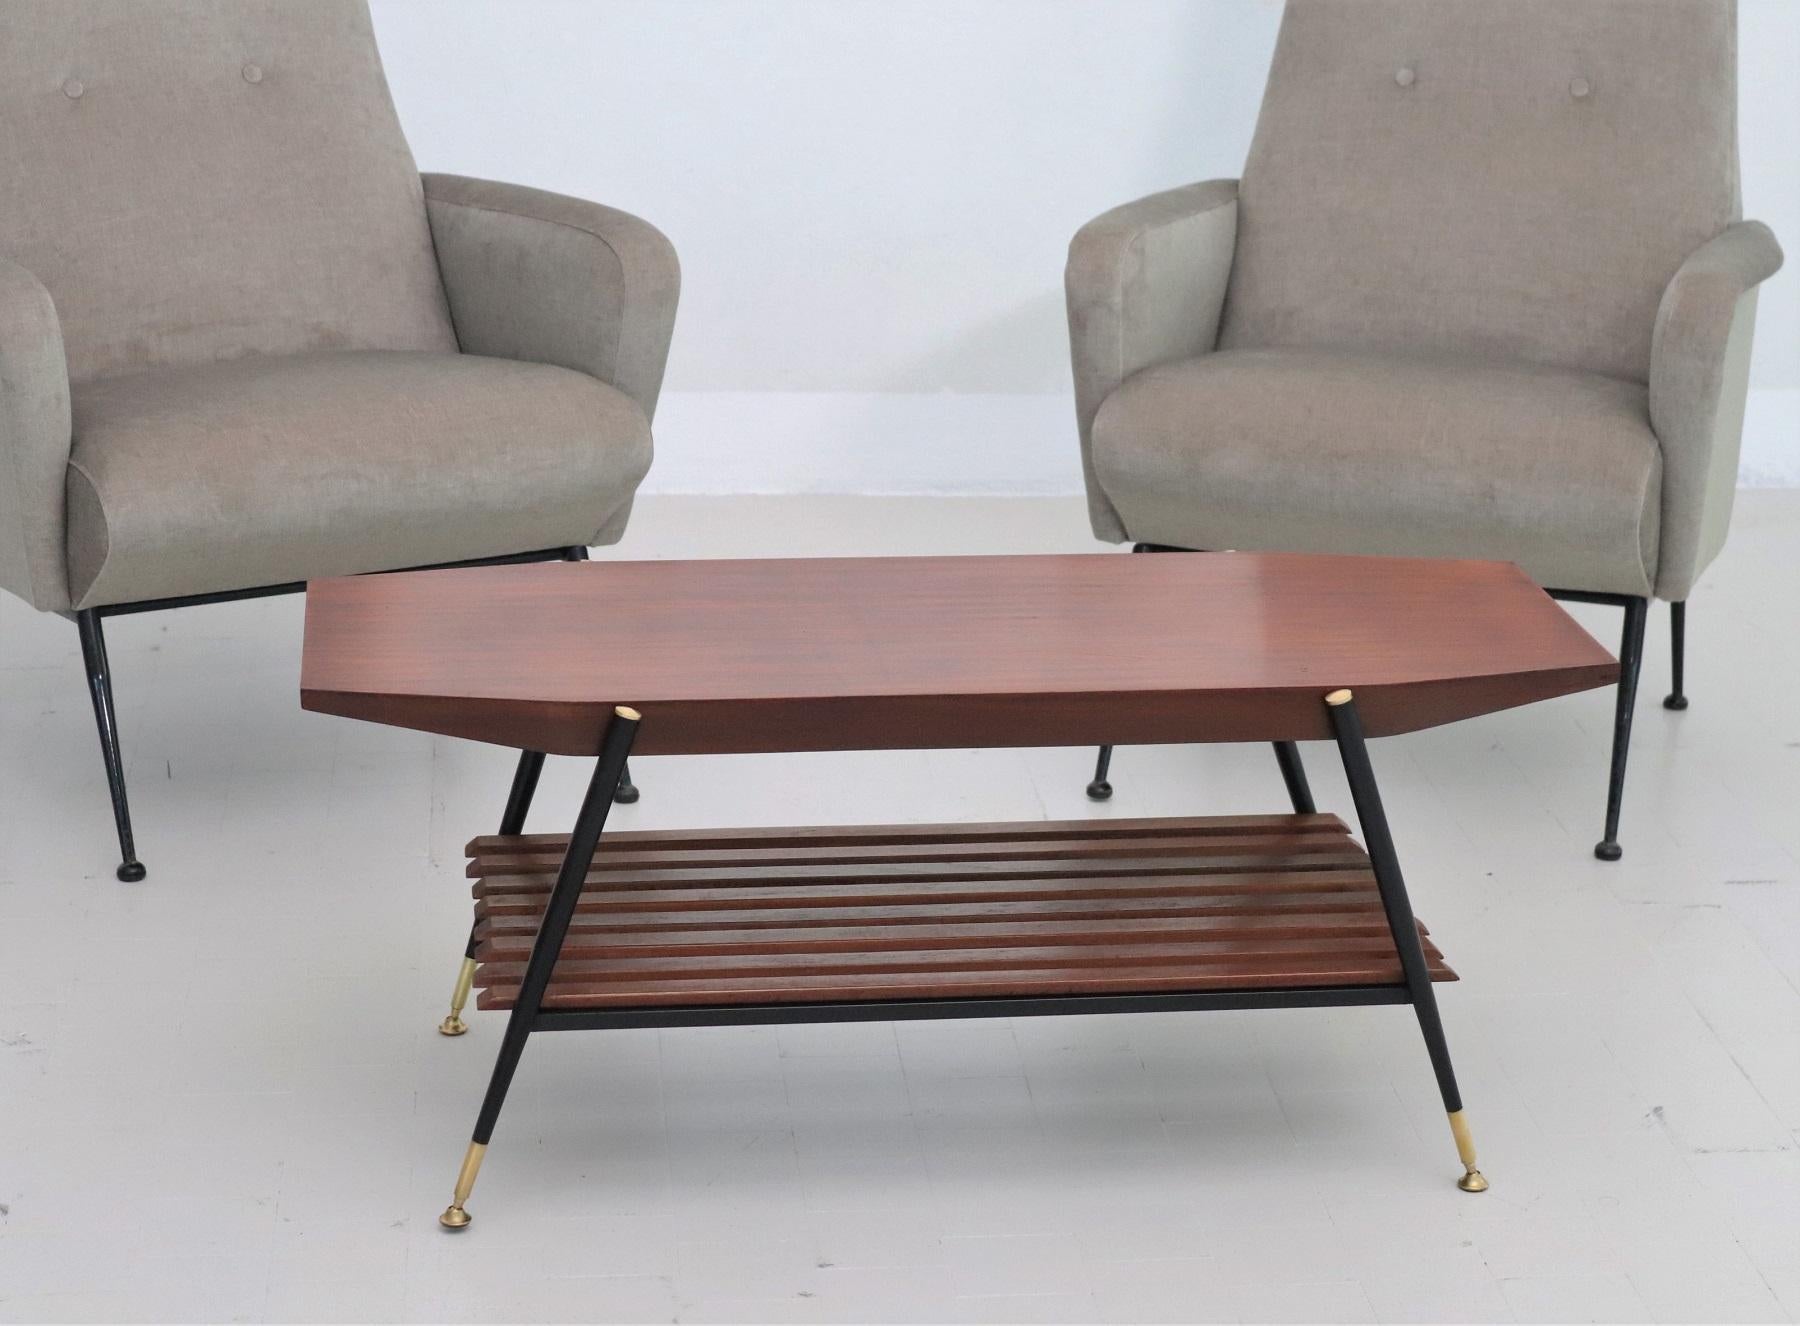 Beautiful octagonal design coffee table from the Italian mid-century, Made in Italy in the 1960s.
Made of a solid metal frame, varnished in black color, with brass details, which are polished.
The lower wooden shelf parts are made of chestnut wood